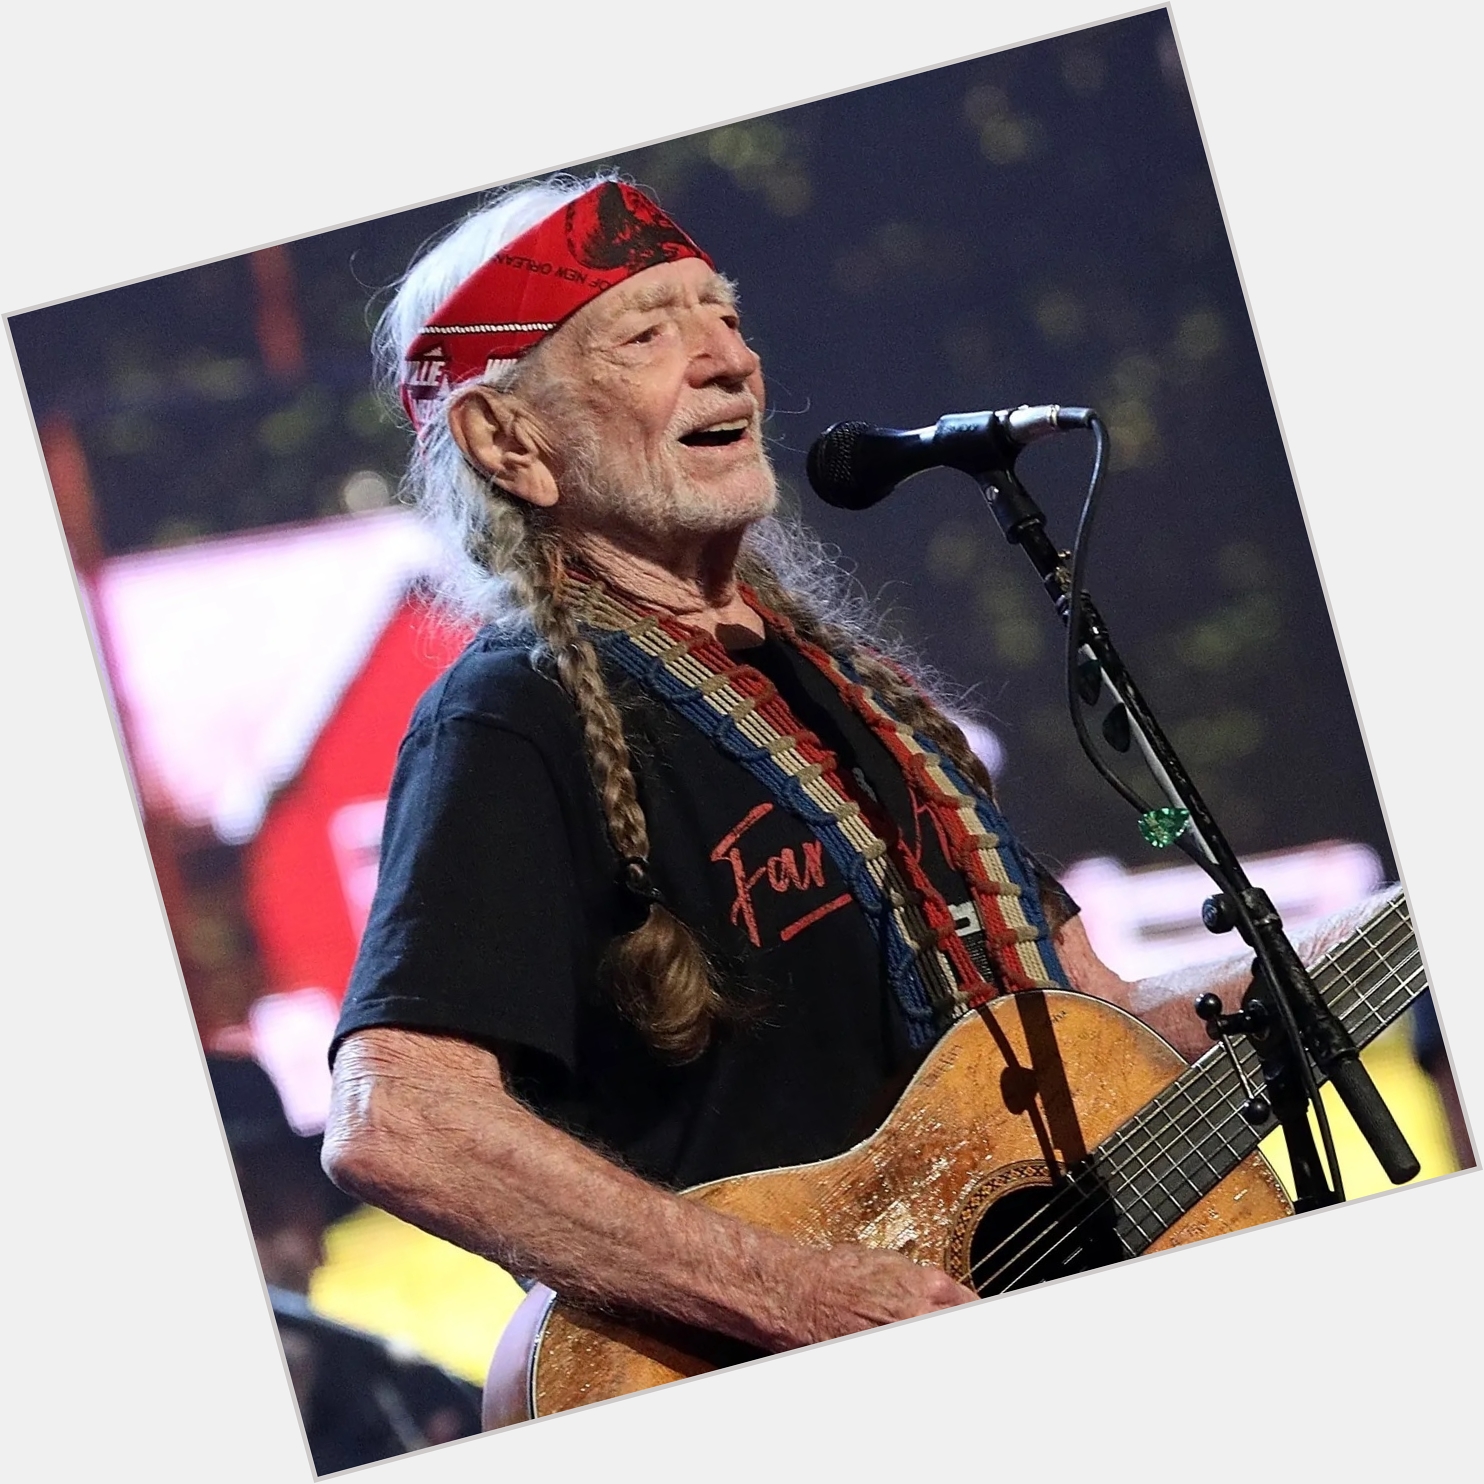 Happy Birthday Willie Nelson! The legend is 89 years young today! 